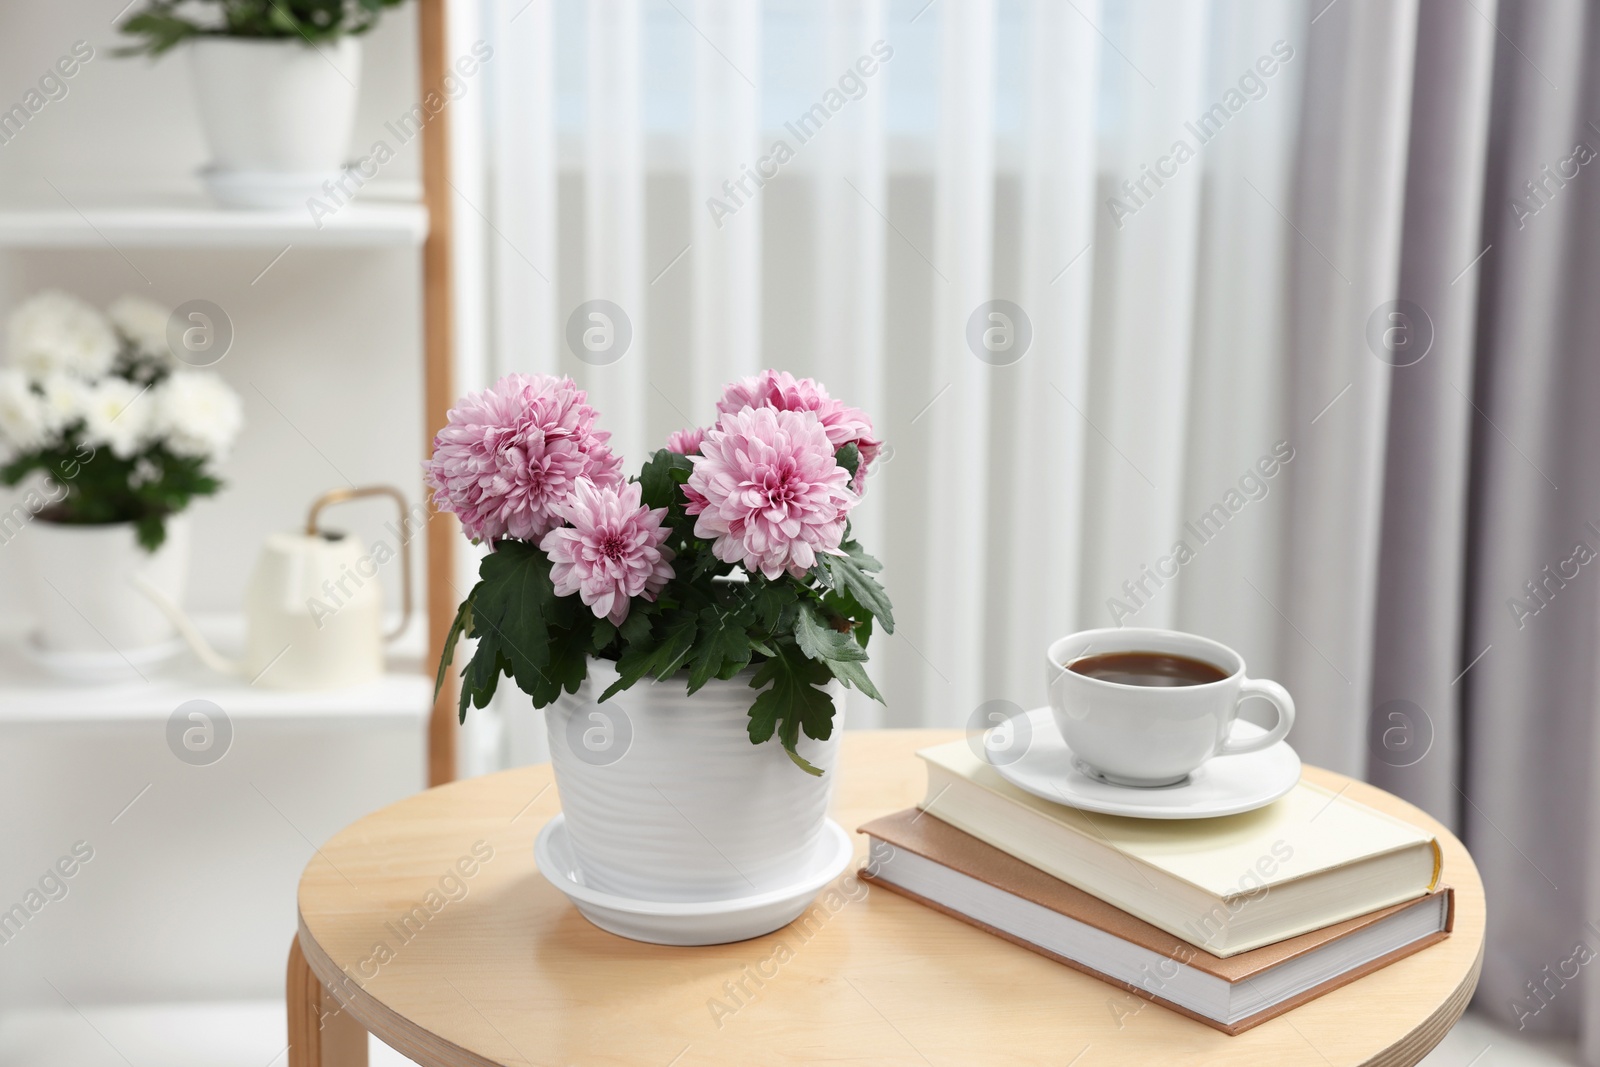 Photo of Beautiful chrysanthemum plant in flower pot, cup of coffee and books on wooden table in room